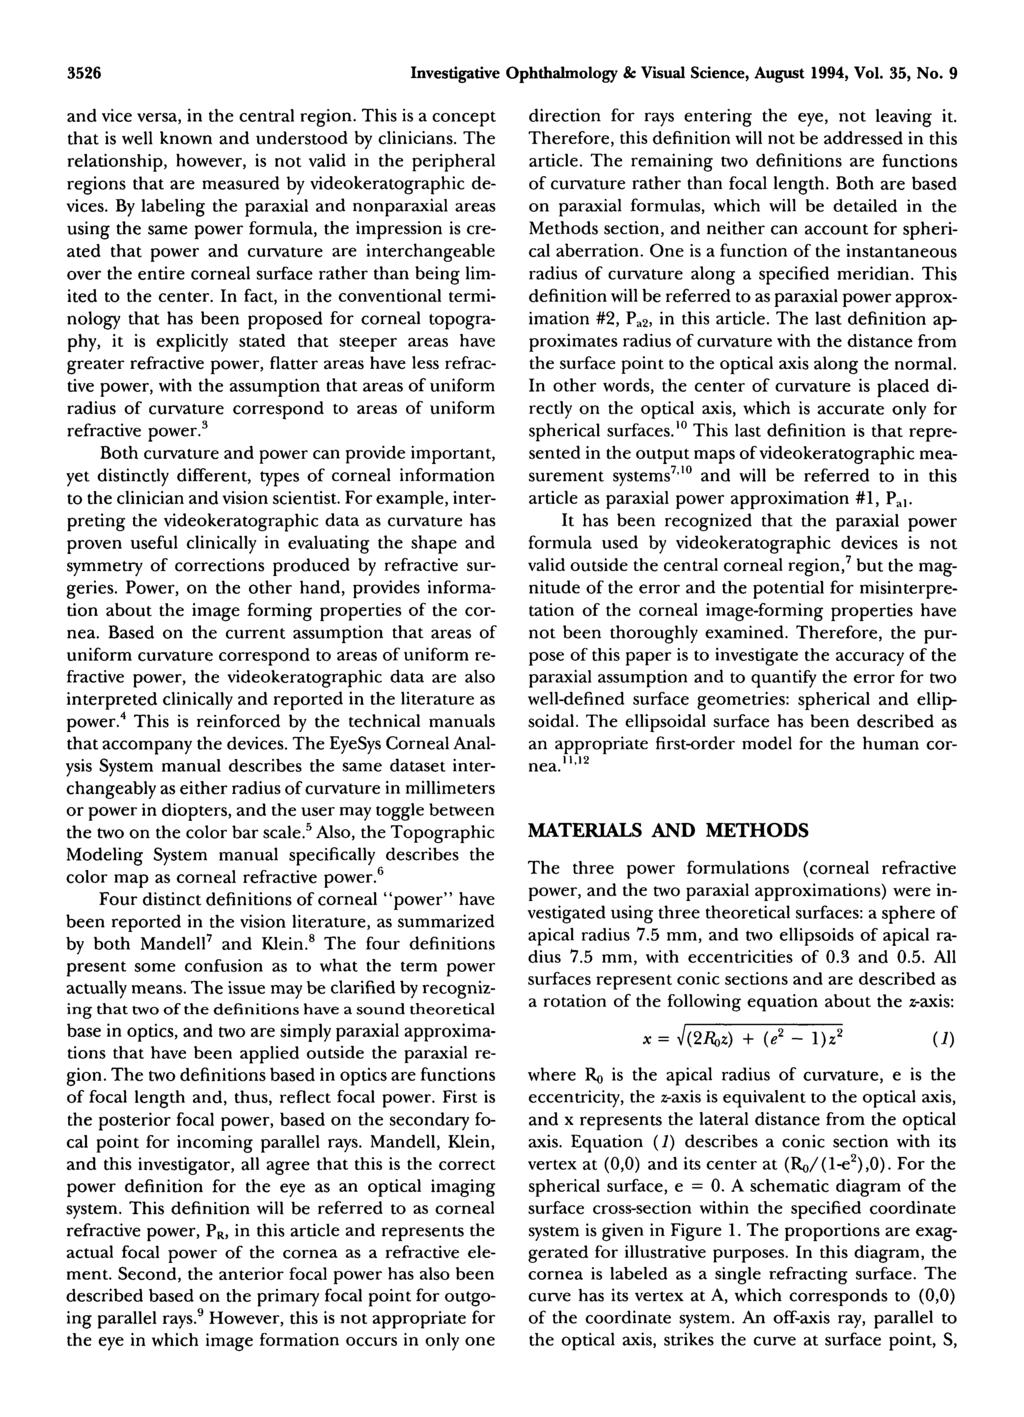 3526 Investigative Ophthalmology 8c Visual Science, August 1994, Vol. 35, No. 9 and vice versa, in the central region. This is a concept that is well known and understood by clinicians.